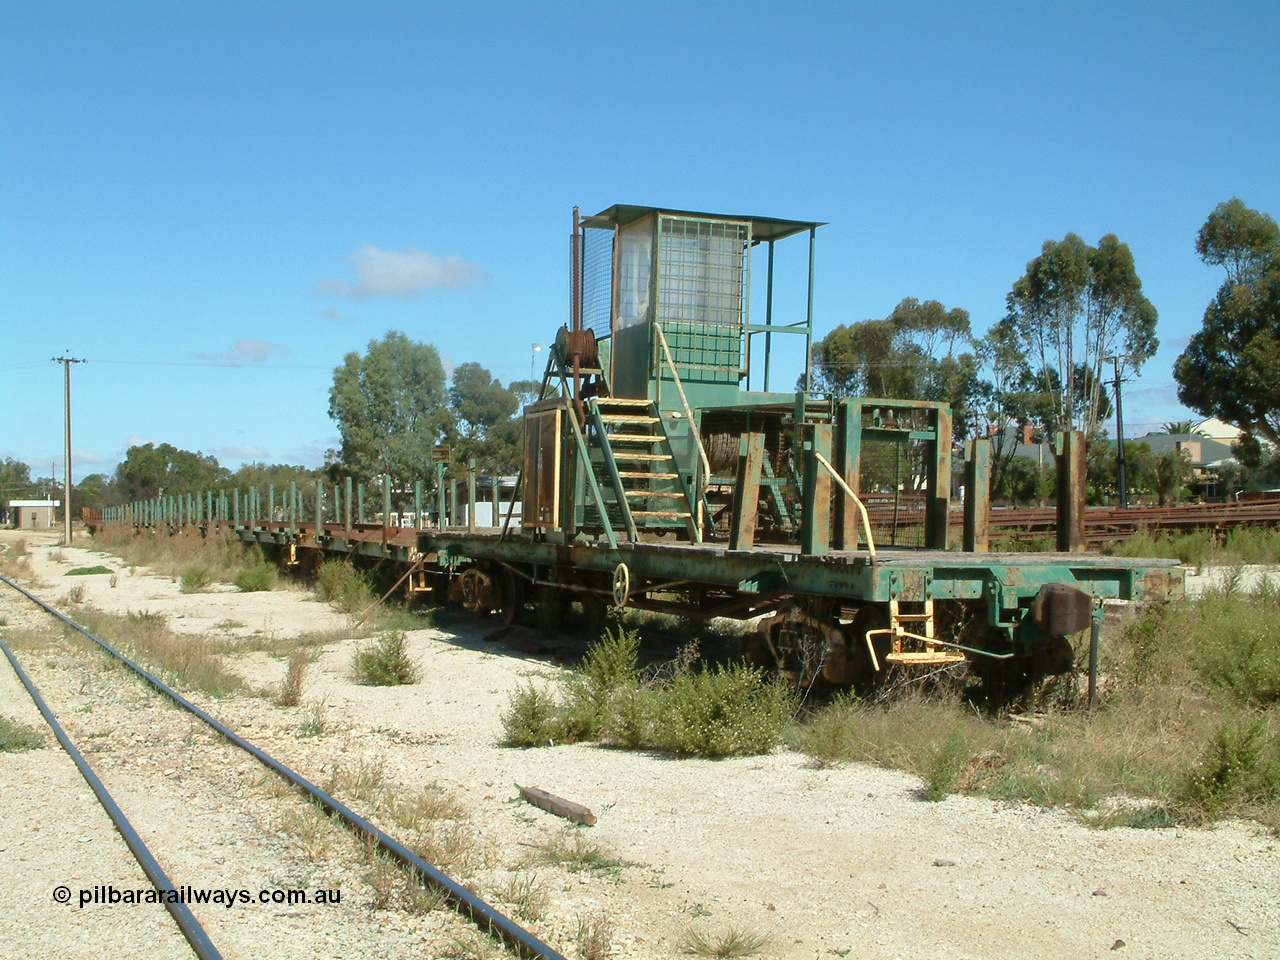 030411 105938
Kimba, rail recovery waggon set with winch waggon EZWL 2, eight ENFR type and one ENFB type waggons. The cabin is mounted above the motor, built using underframe of broad gauge horse box BH 4331. To Eyre Peninsula 1992, re-coded then from AZWL. Scrapped in 2005.
Keywords: EZWL-type;EZWL2;SAR-Islington-WS;BH-type;BH4331;